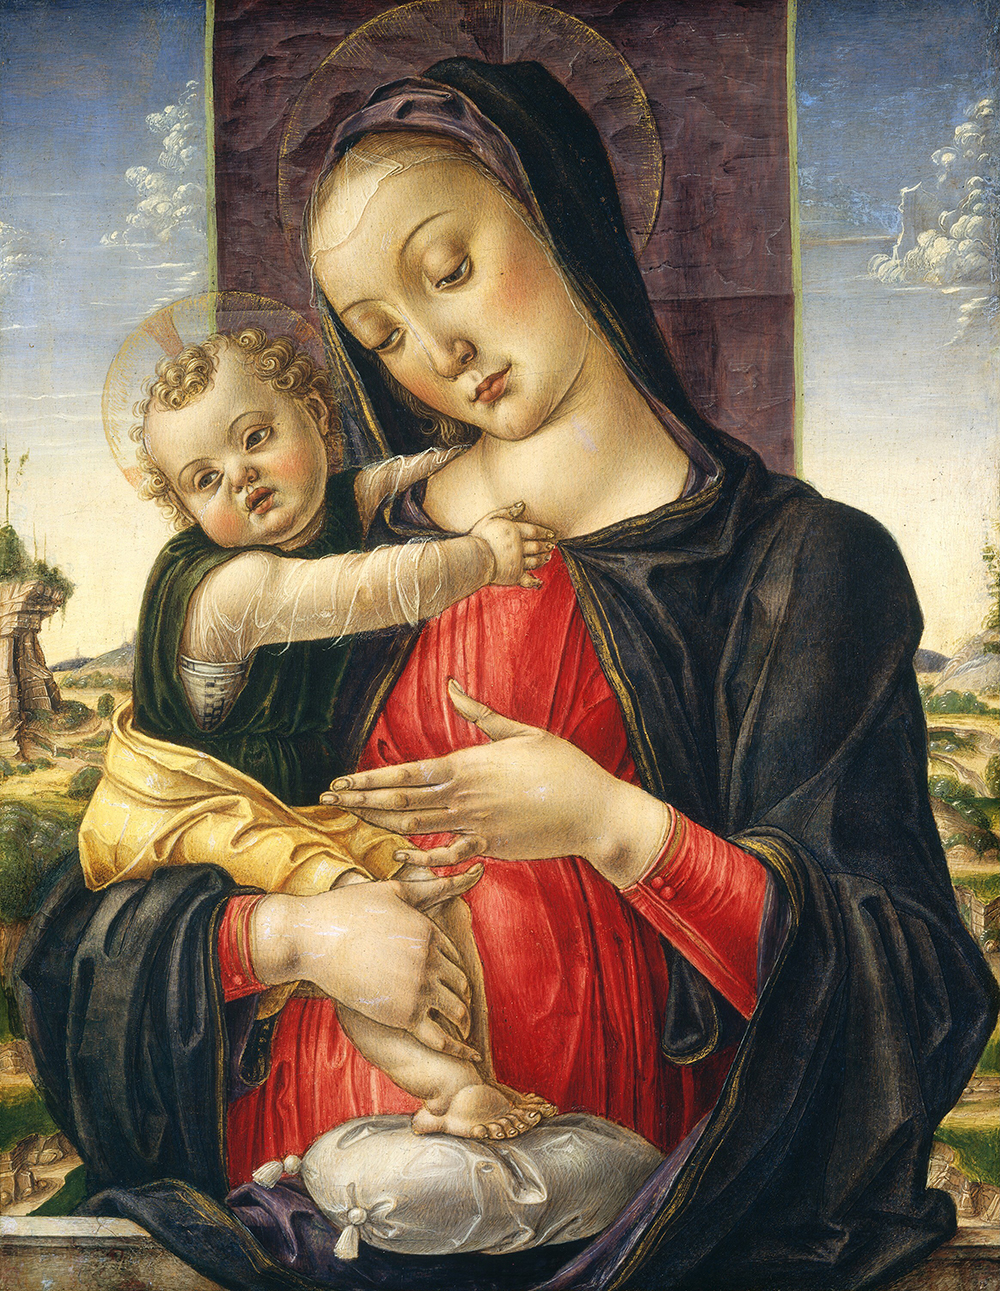 Tempera painting of the Madonna and child. The child's feet rest on a pillow.